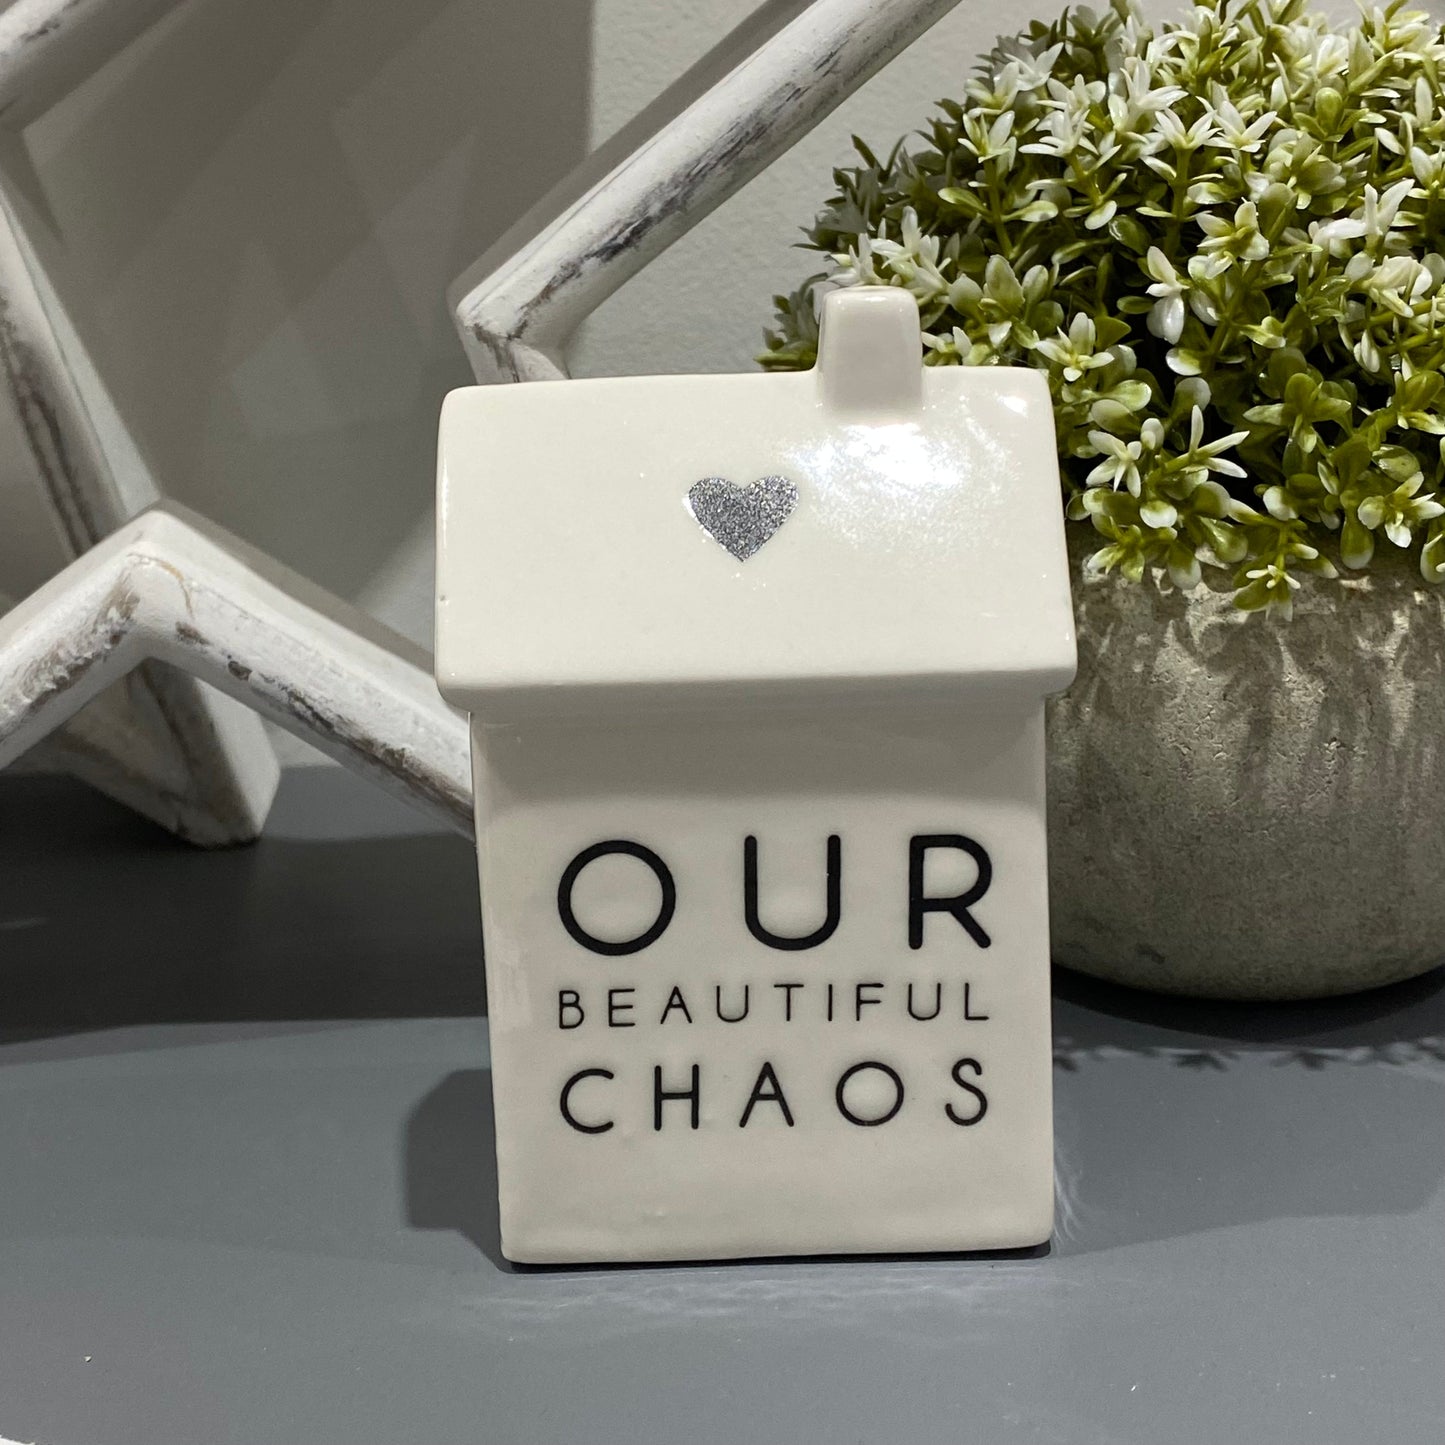 Our Beautiful Chaos Porcelain House - imperfect